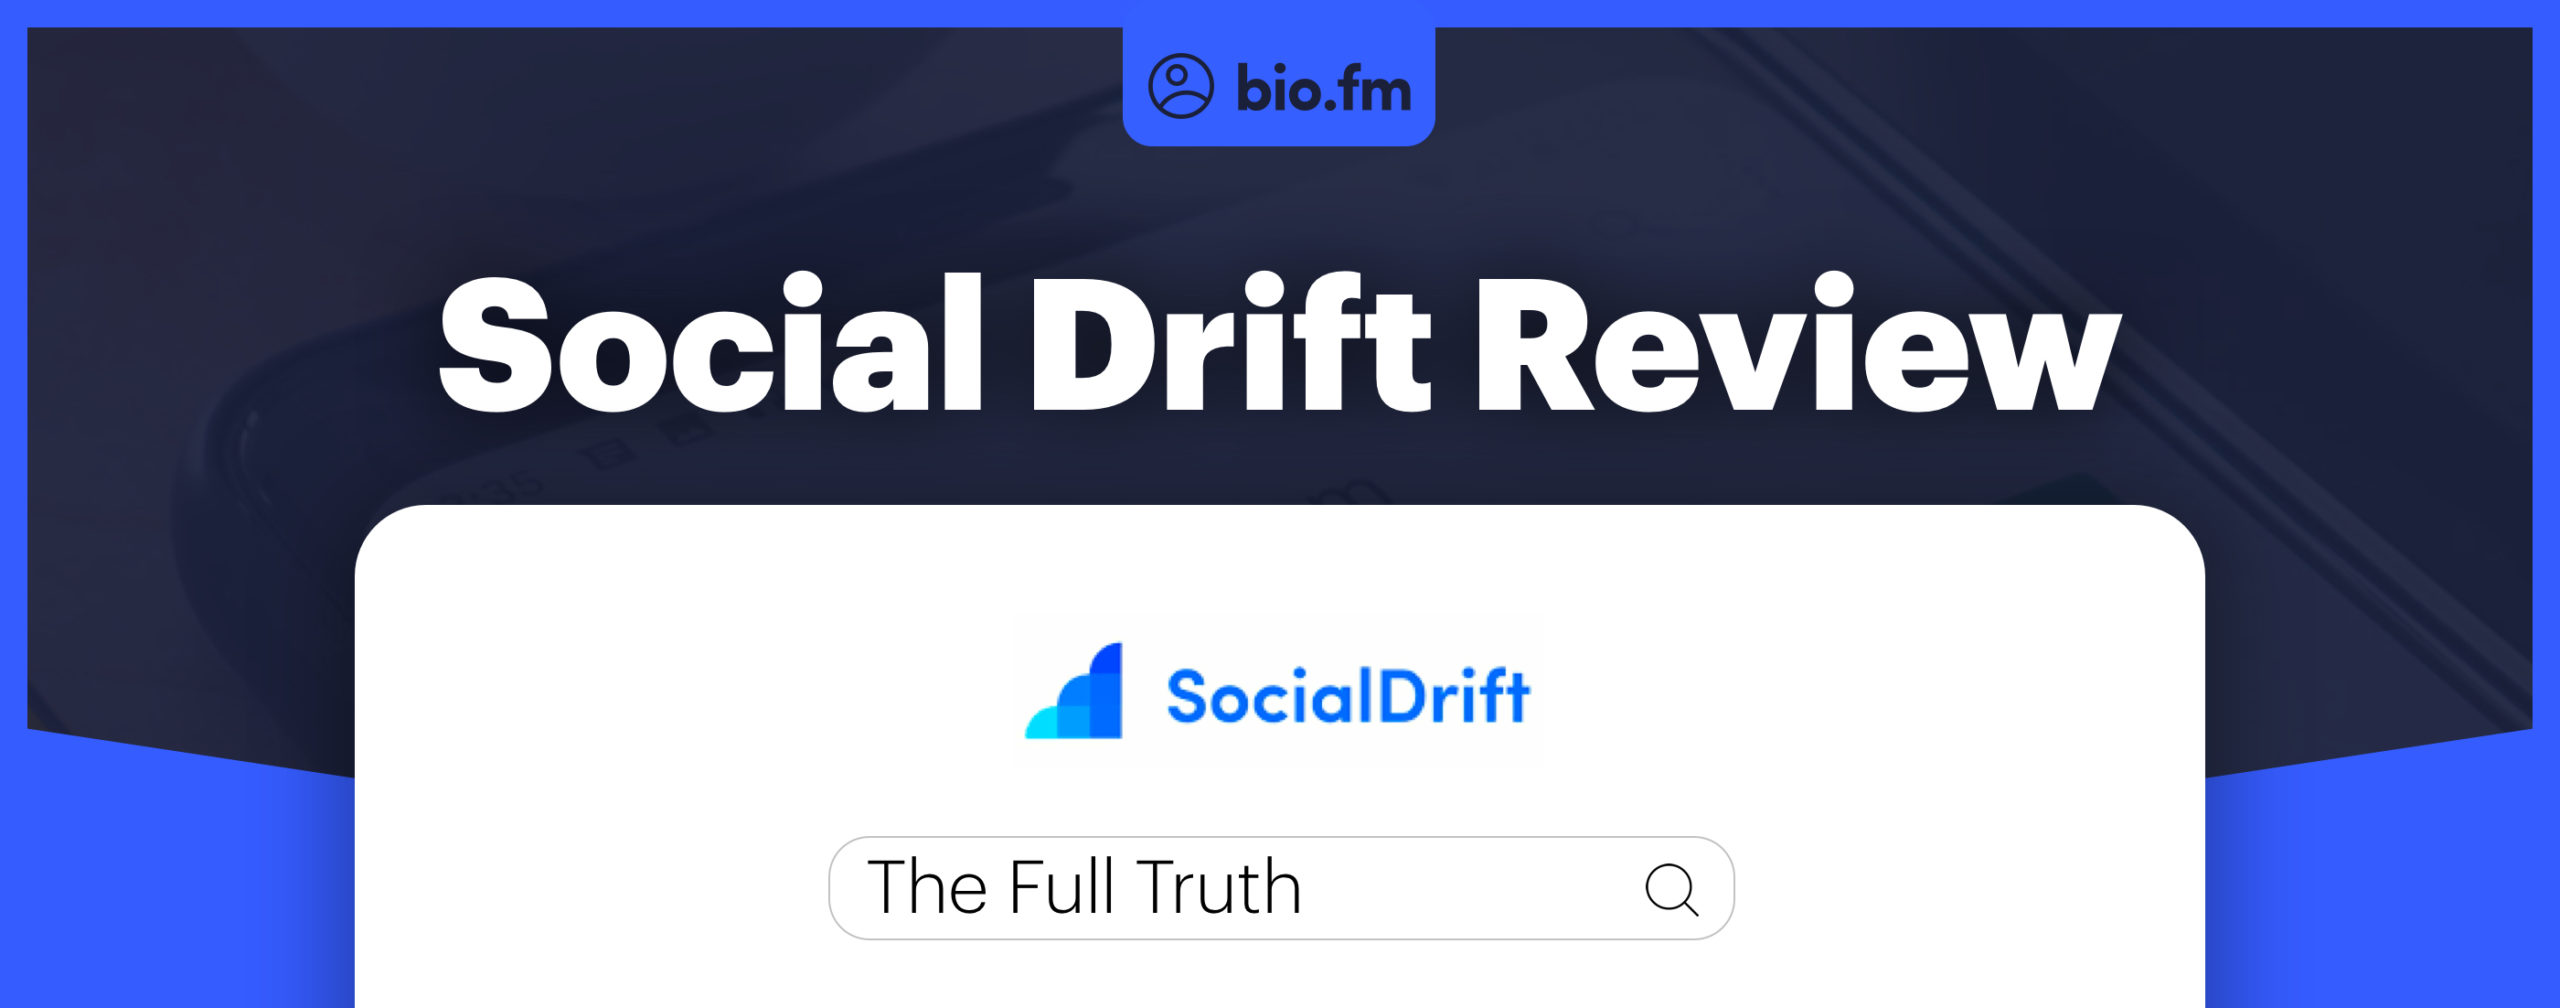 social drift review featured image